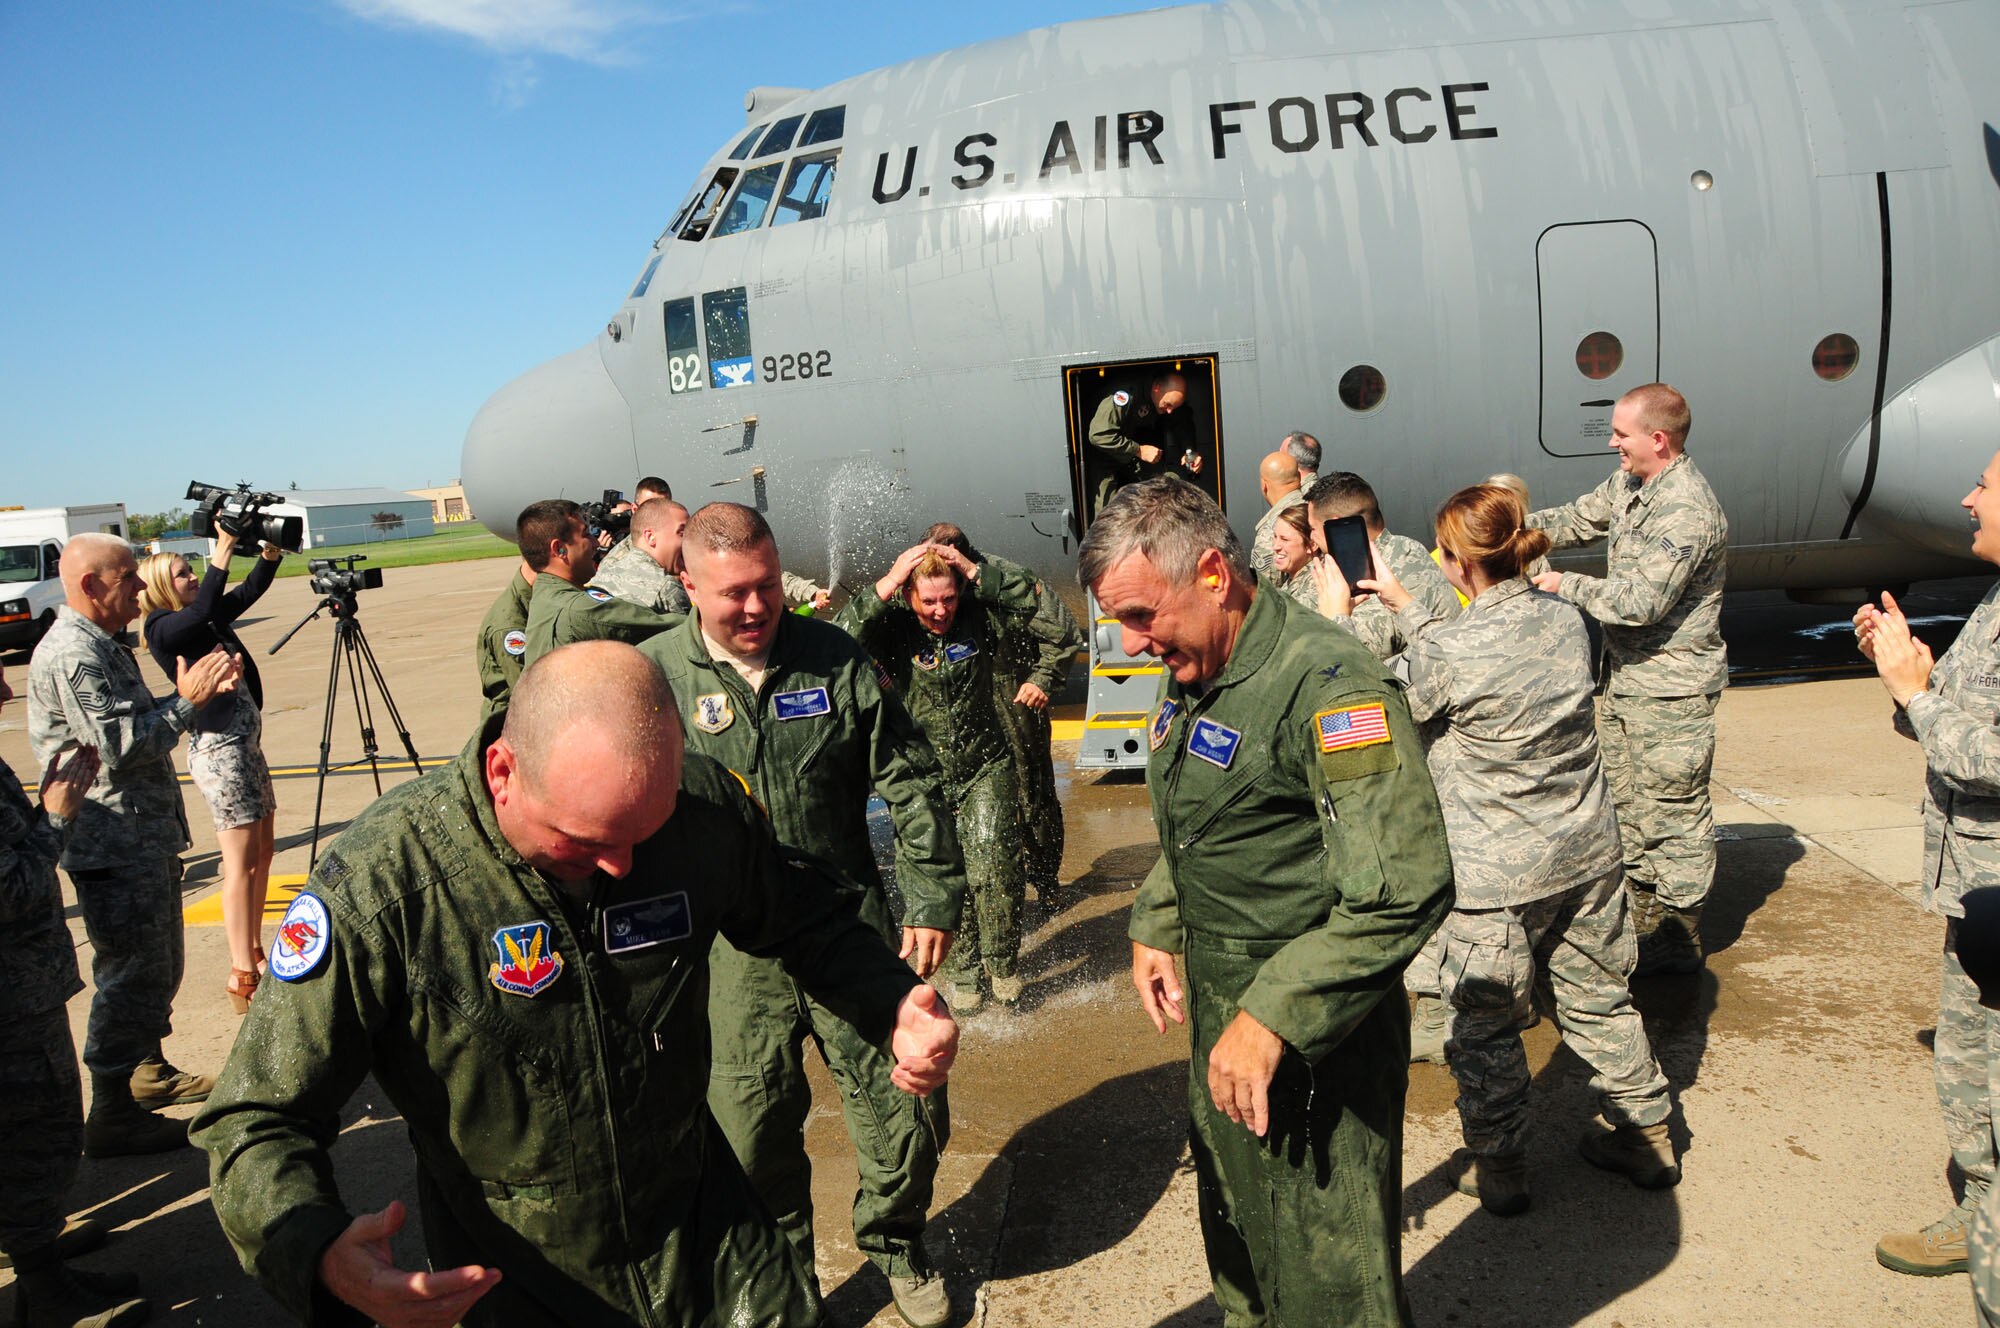 The aircrew from the New York Air National Guard's 107th Airlift Wing is doused after stepping off a C-130 for the last time, a tradition after a "fini flight" on Thursday, Sept. 25, 2014. It was the last C-130 flight for the 107th Airlift Wing at the Niagara Falls Air Reserve Station as it converts to MQ-9 operations. (U.S. Air National Guard Photo by Senior Master Sgt. Raymond Lloyd/Released)